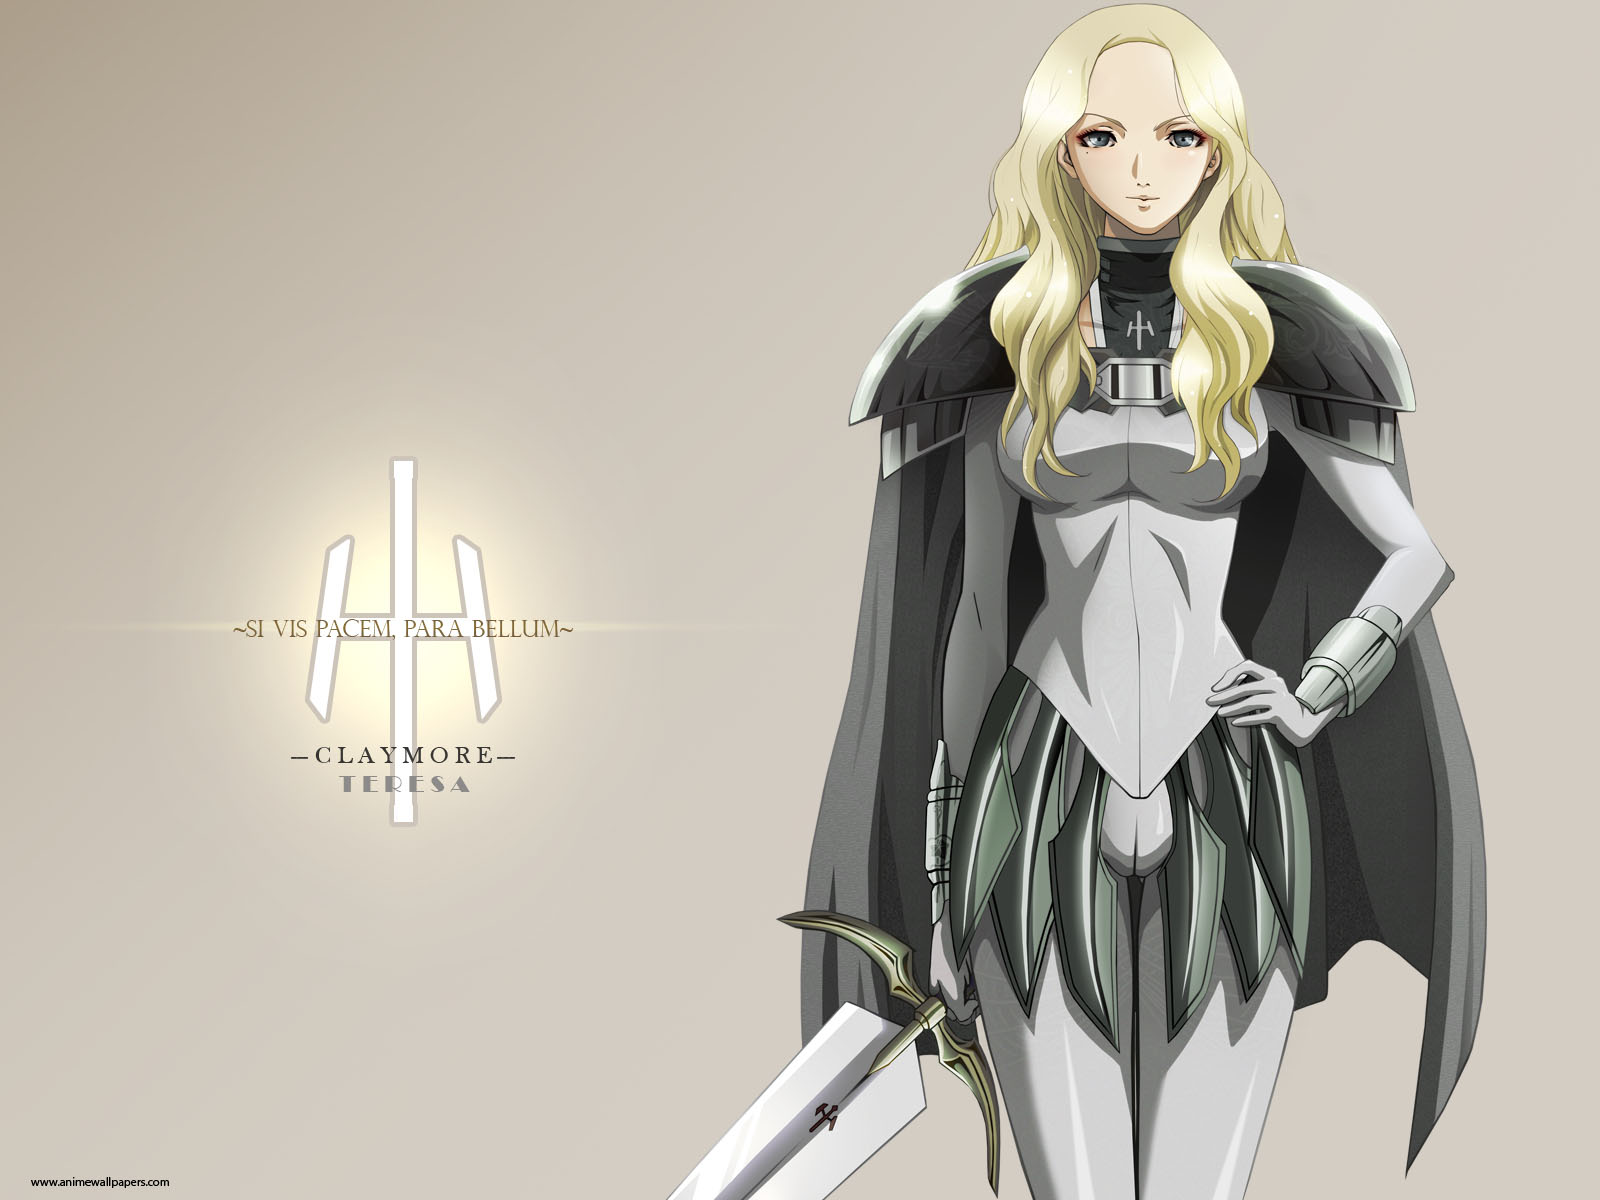 Claymore: The History Behind The Anime and The Ultimate Weapon -  MyAnimeList.net